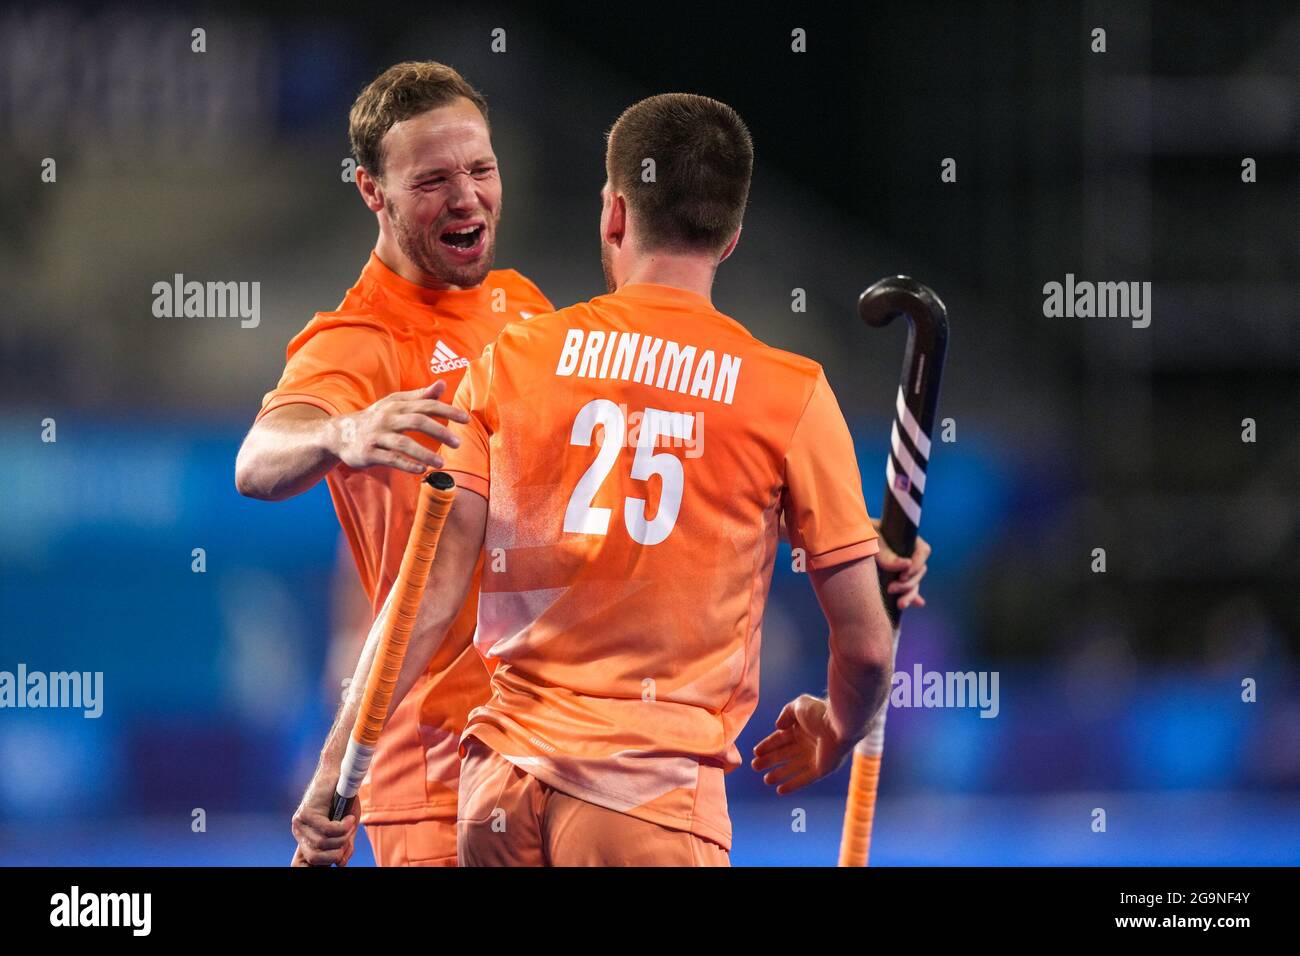 TOKYO, JAPAN - JULY 27: Thierry Brinkman of the Netherlands celebrates after scoring his sides second goal competing on Men's Pool B during the Tokyo 2020 Olympic Games at the Oi Hockey Stadium on July 27, 2021 in Tokyo, Japan (Photo by Yannick Verhoeven/Orange Pictures) NOCNSF Stock Photo